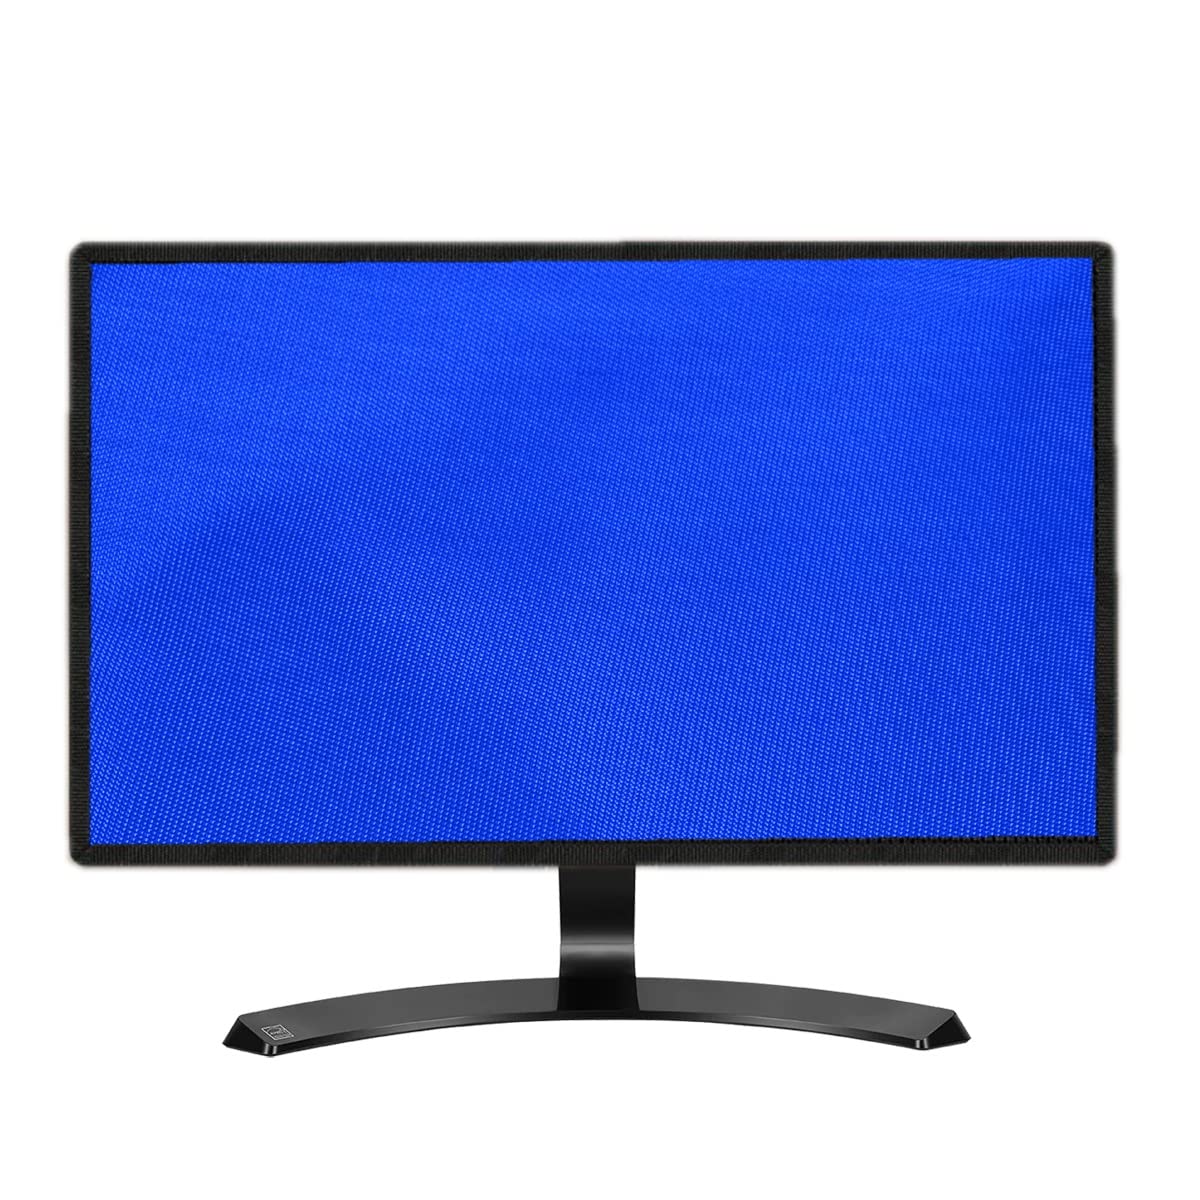 PalaP Super Premium Dust Proof Monitor Cover for LG 21.5 inches Monitor (Bright Blue)